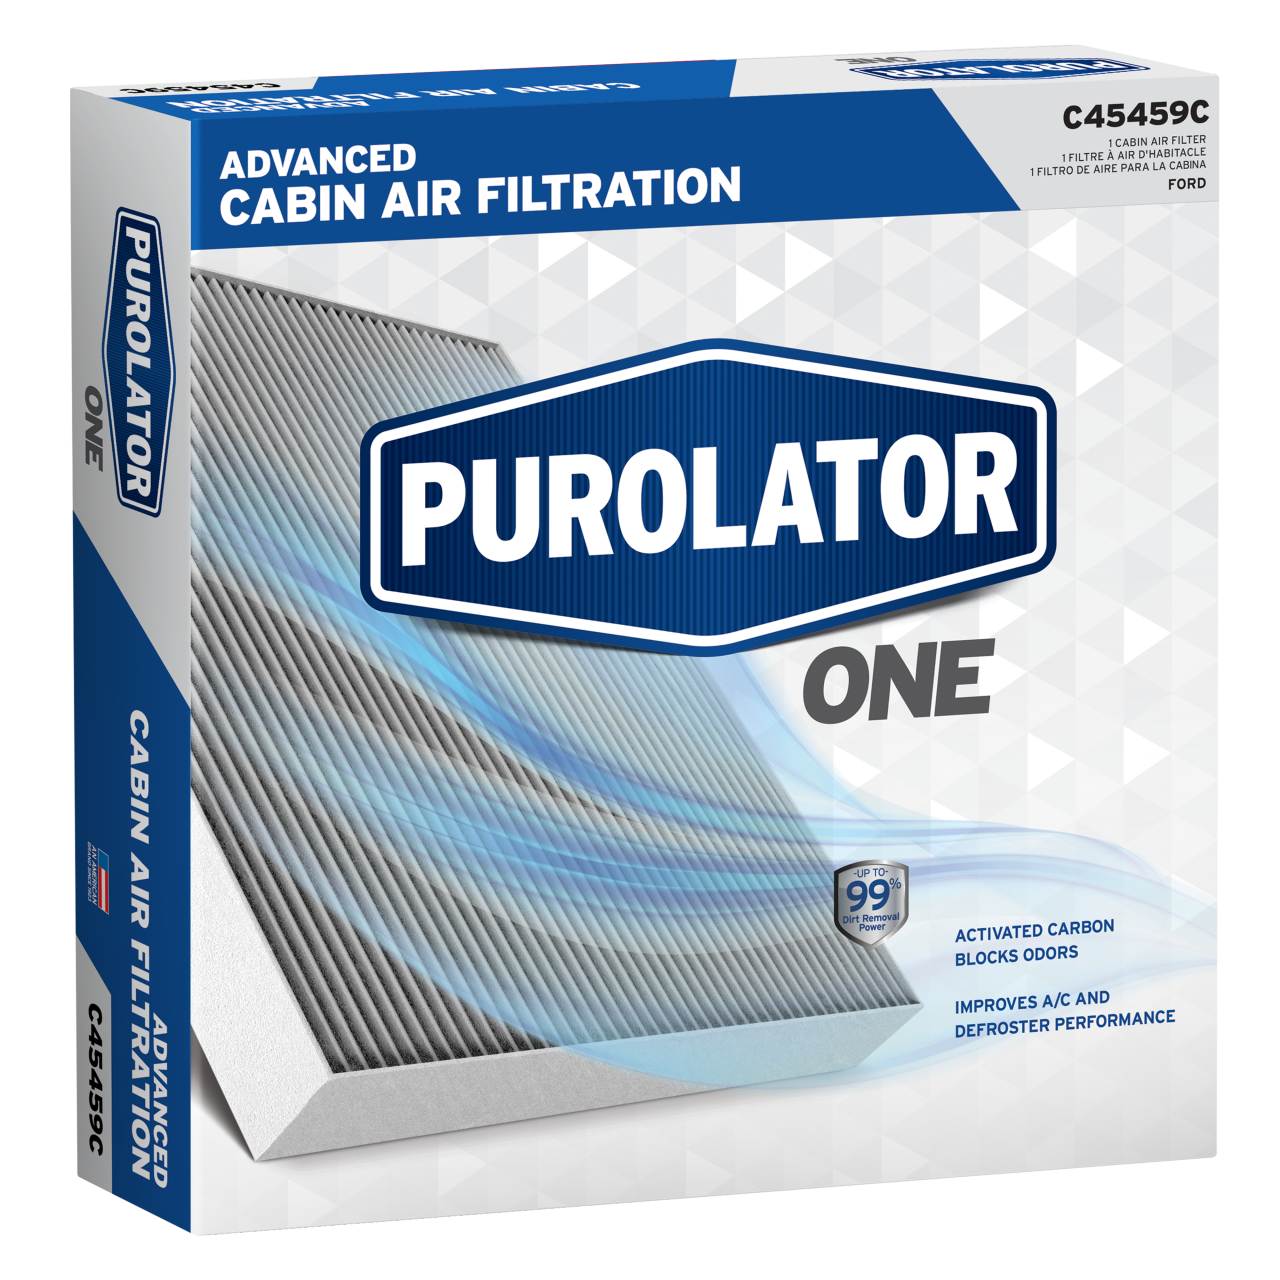 PurolatorONE™ Cabin Air Filters improve overall driving comfort, encourage better airflow through your vehicle and aid in defroster performance.